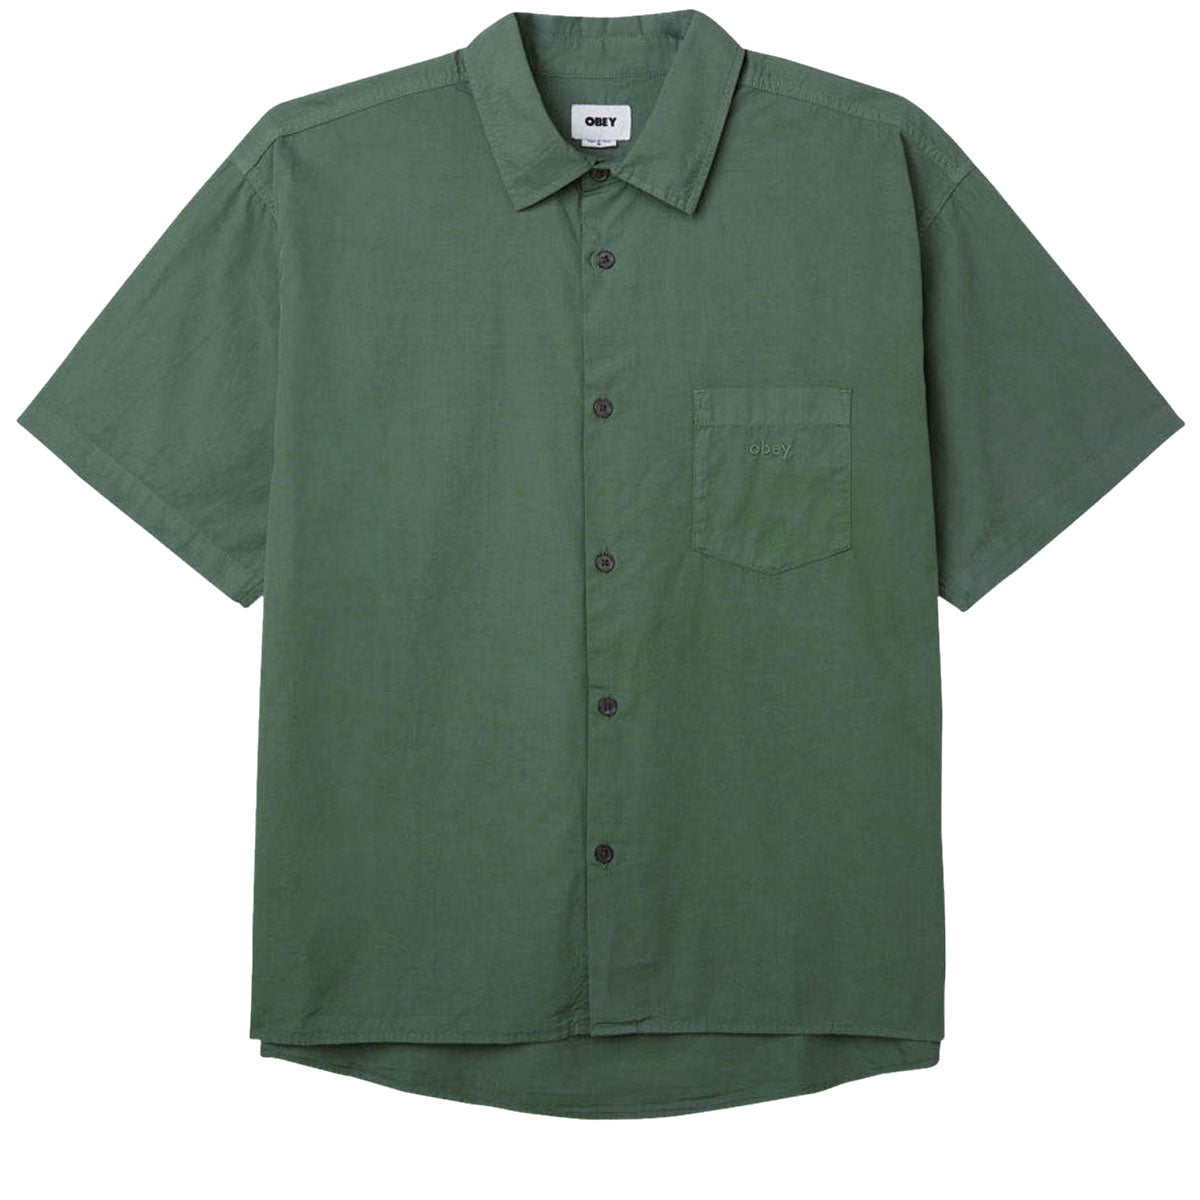 Obey Pigment Sully Woven Shirt - Pigment Laurel Wreath image 1